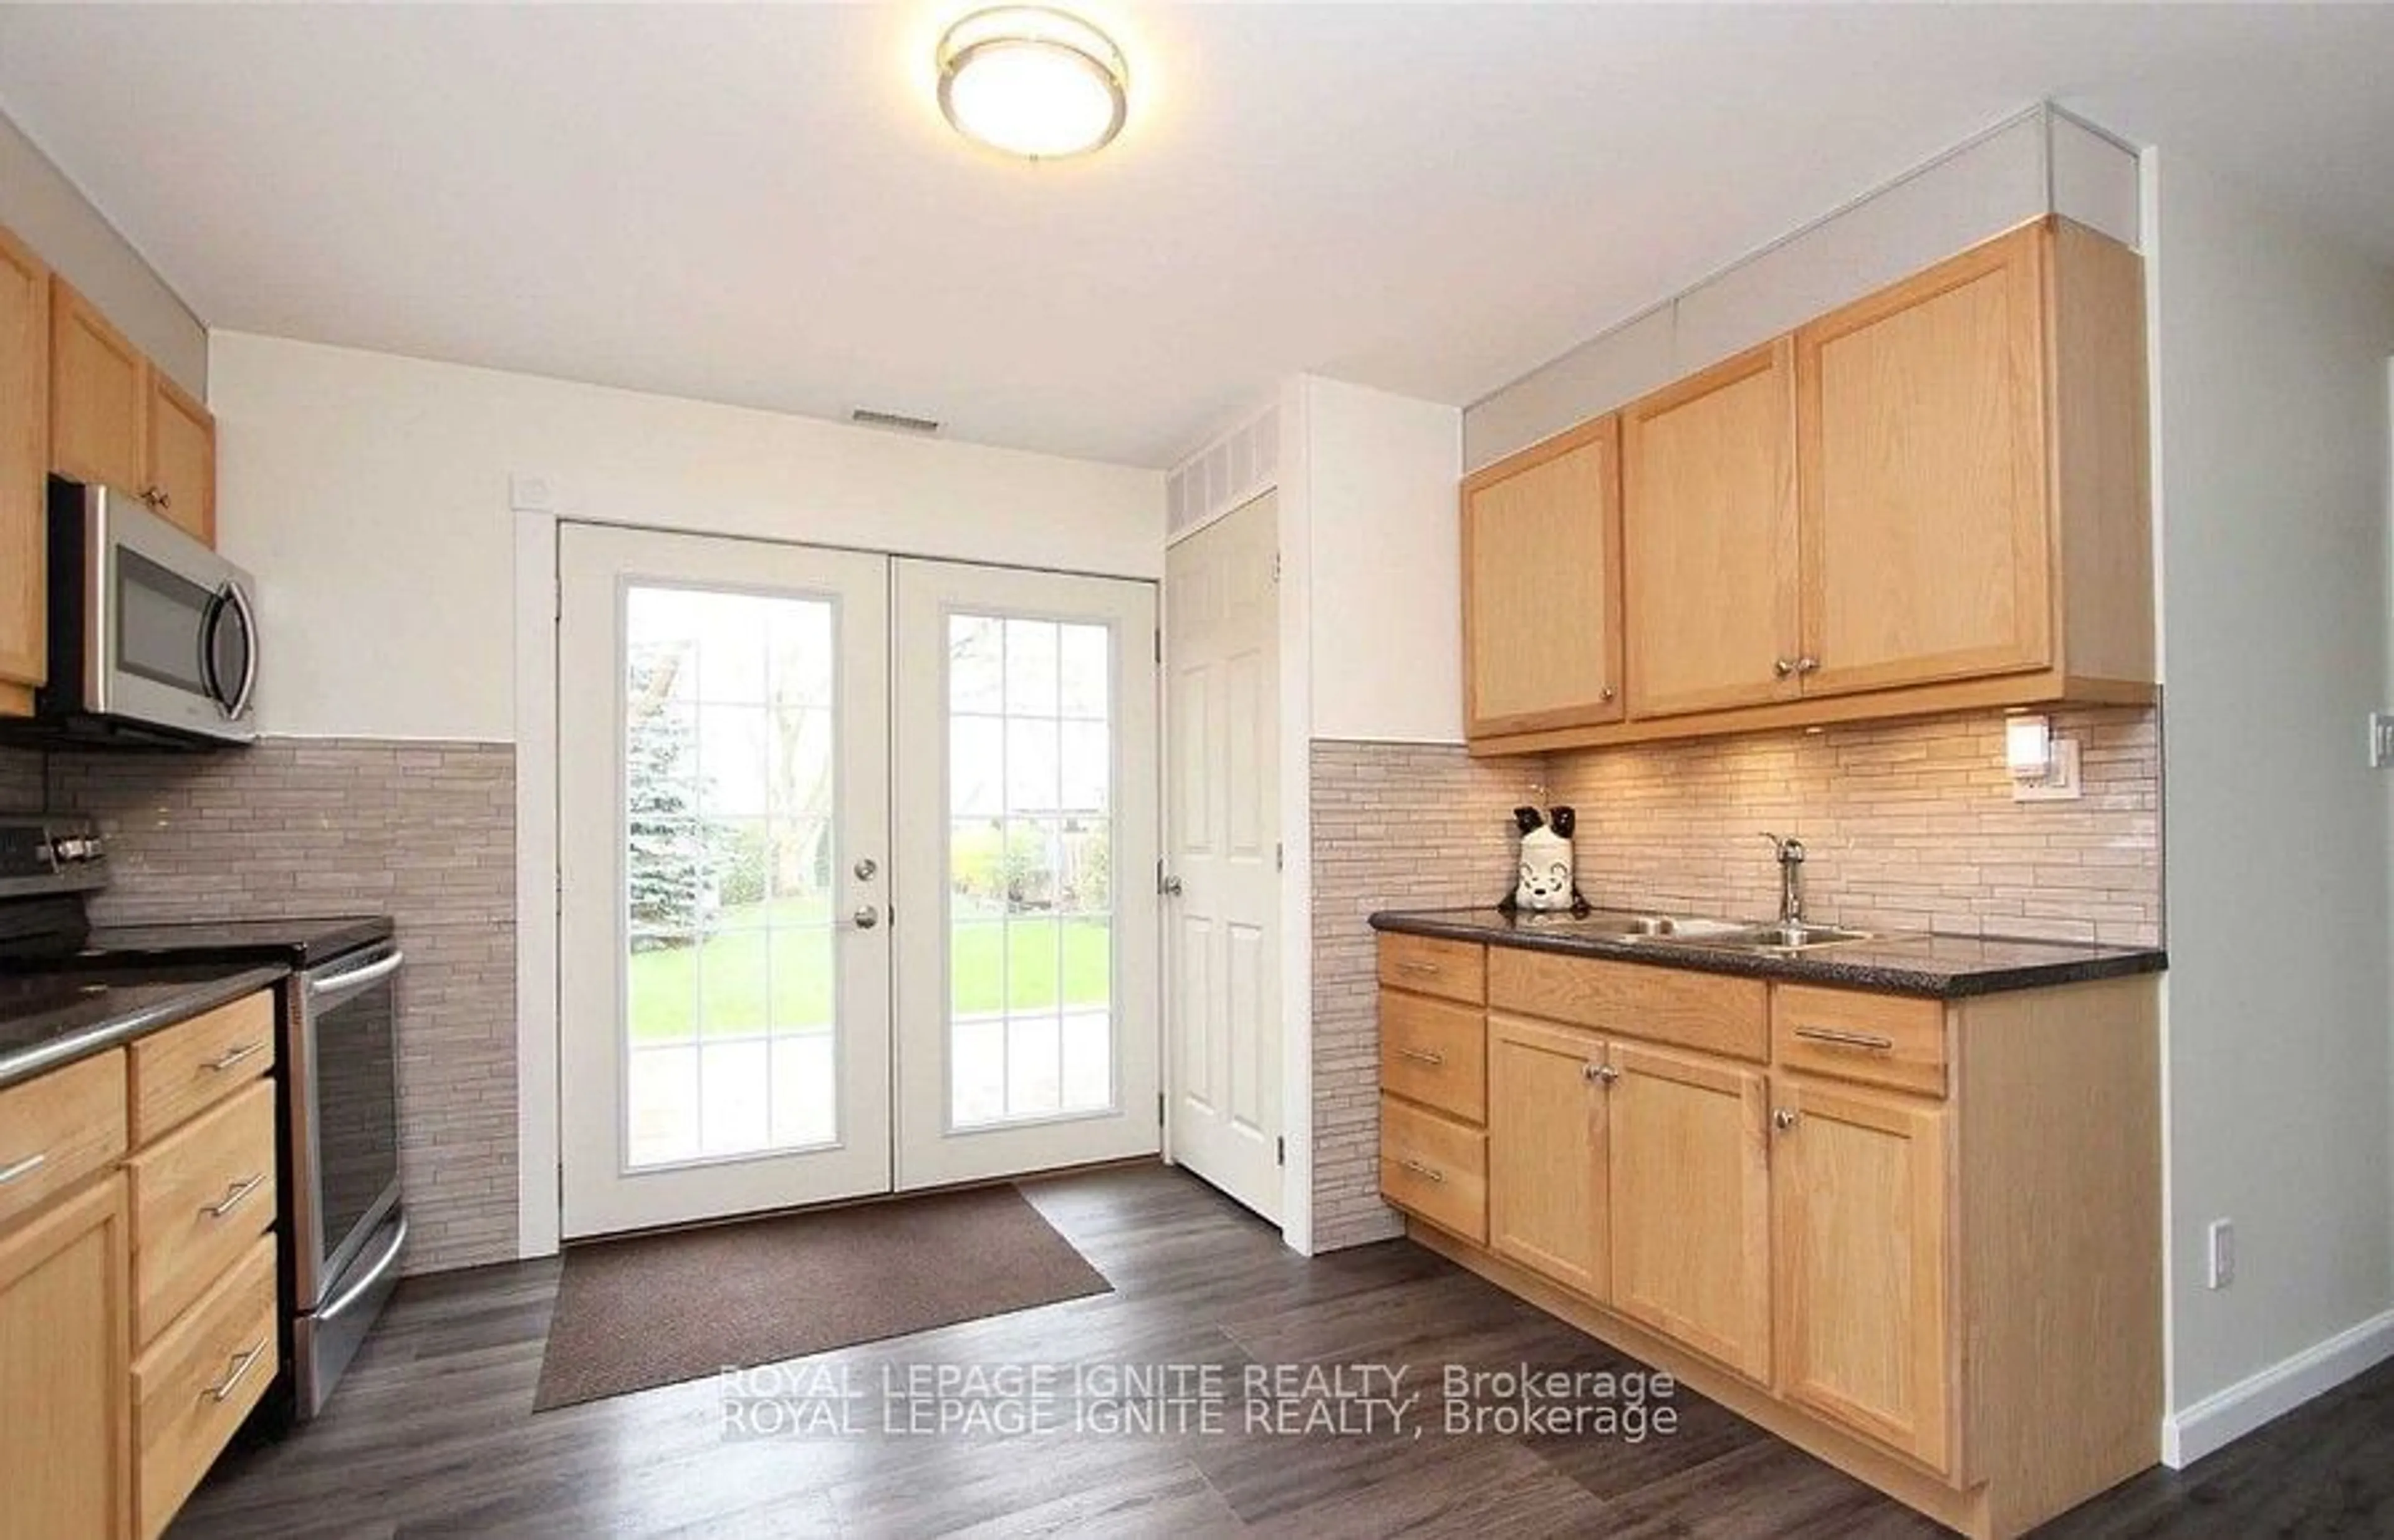 Standard kitchen for 1010 Byron St, Whitby Ontario L1N 4P3